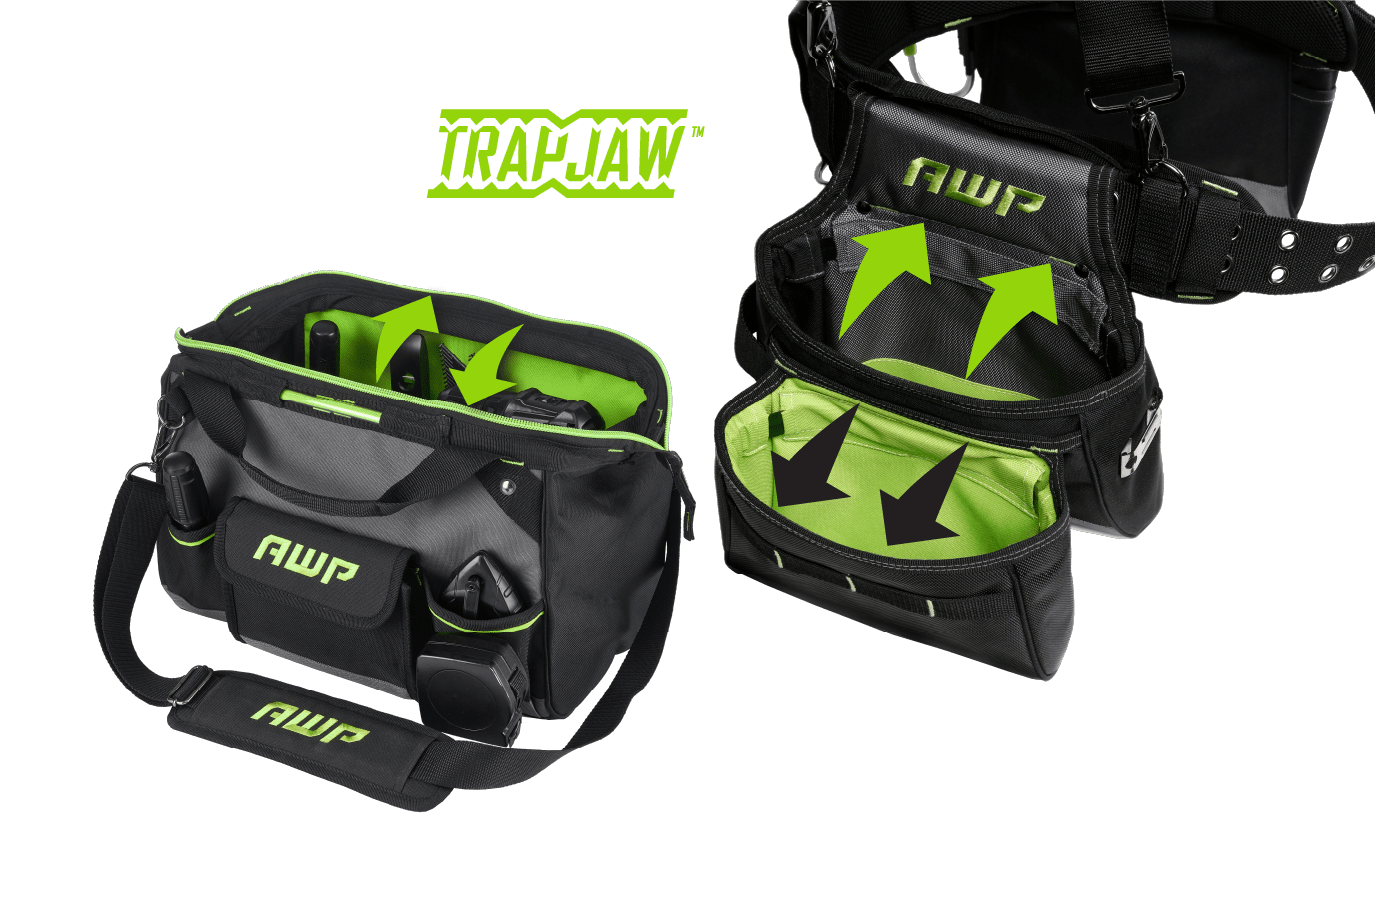 Trapjaw Tool Belts and Storage